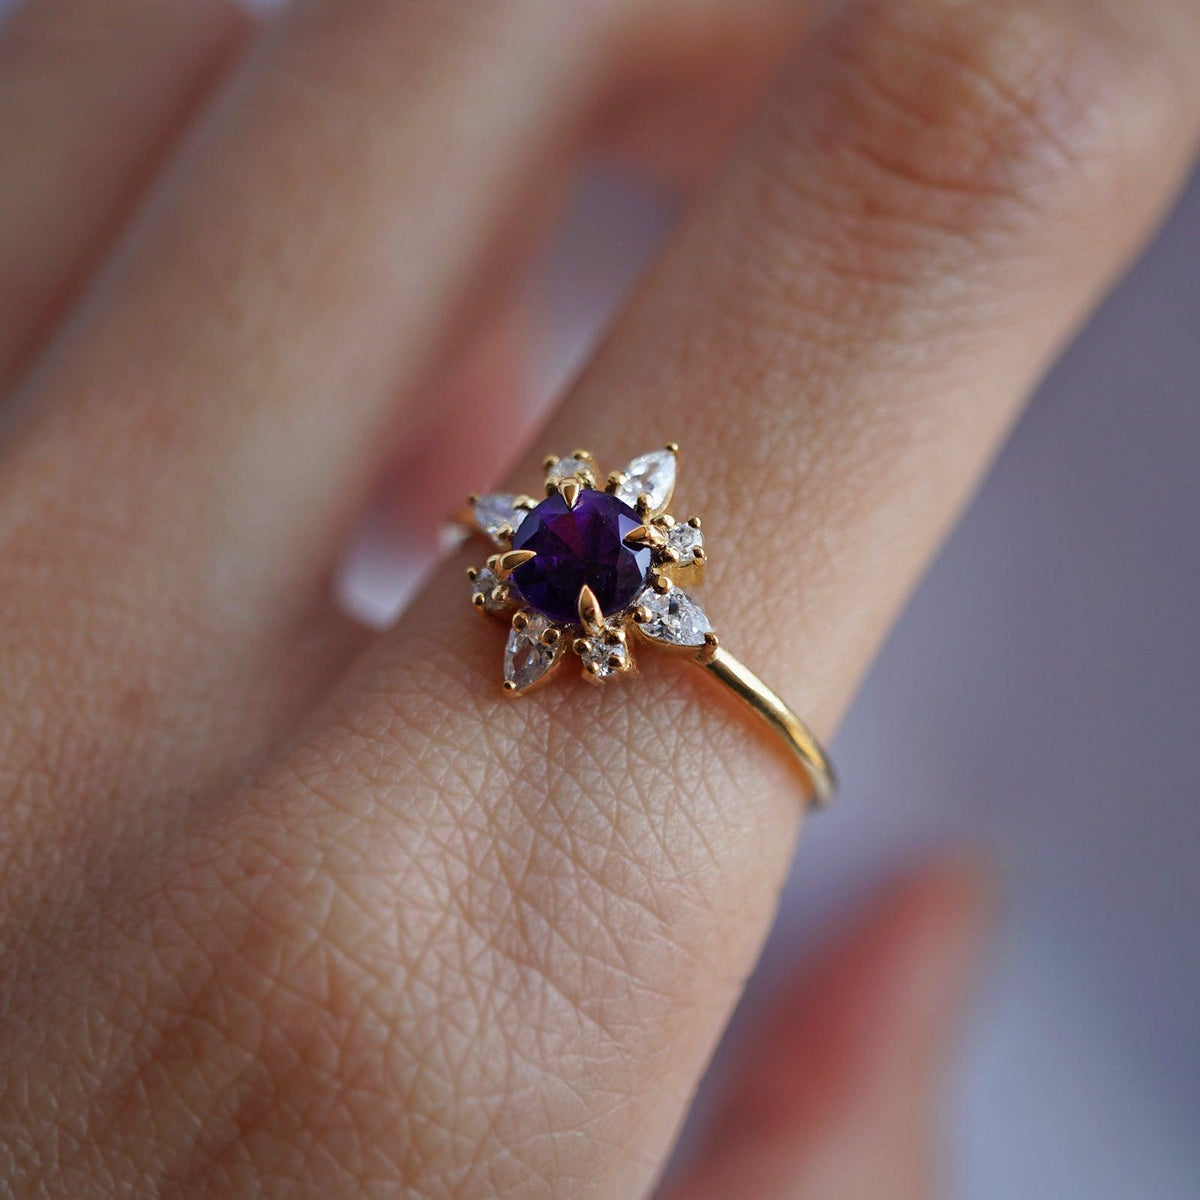 Amethyst Passion Flower Ring - Tippy Taste Jewelry